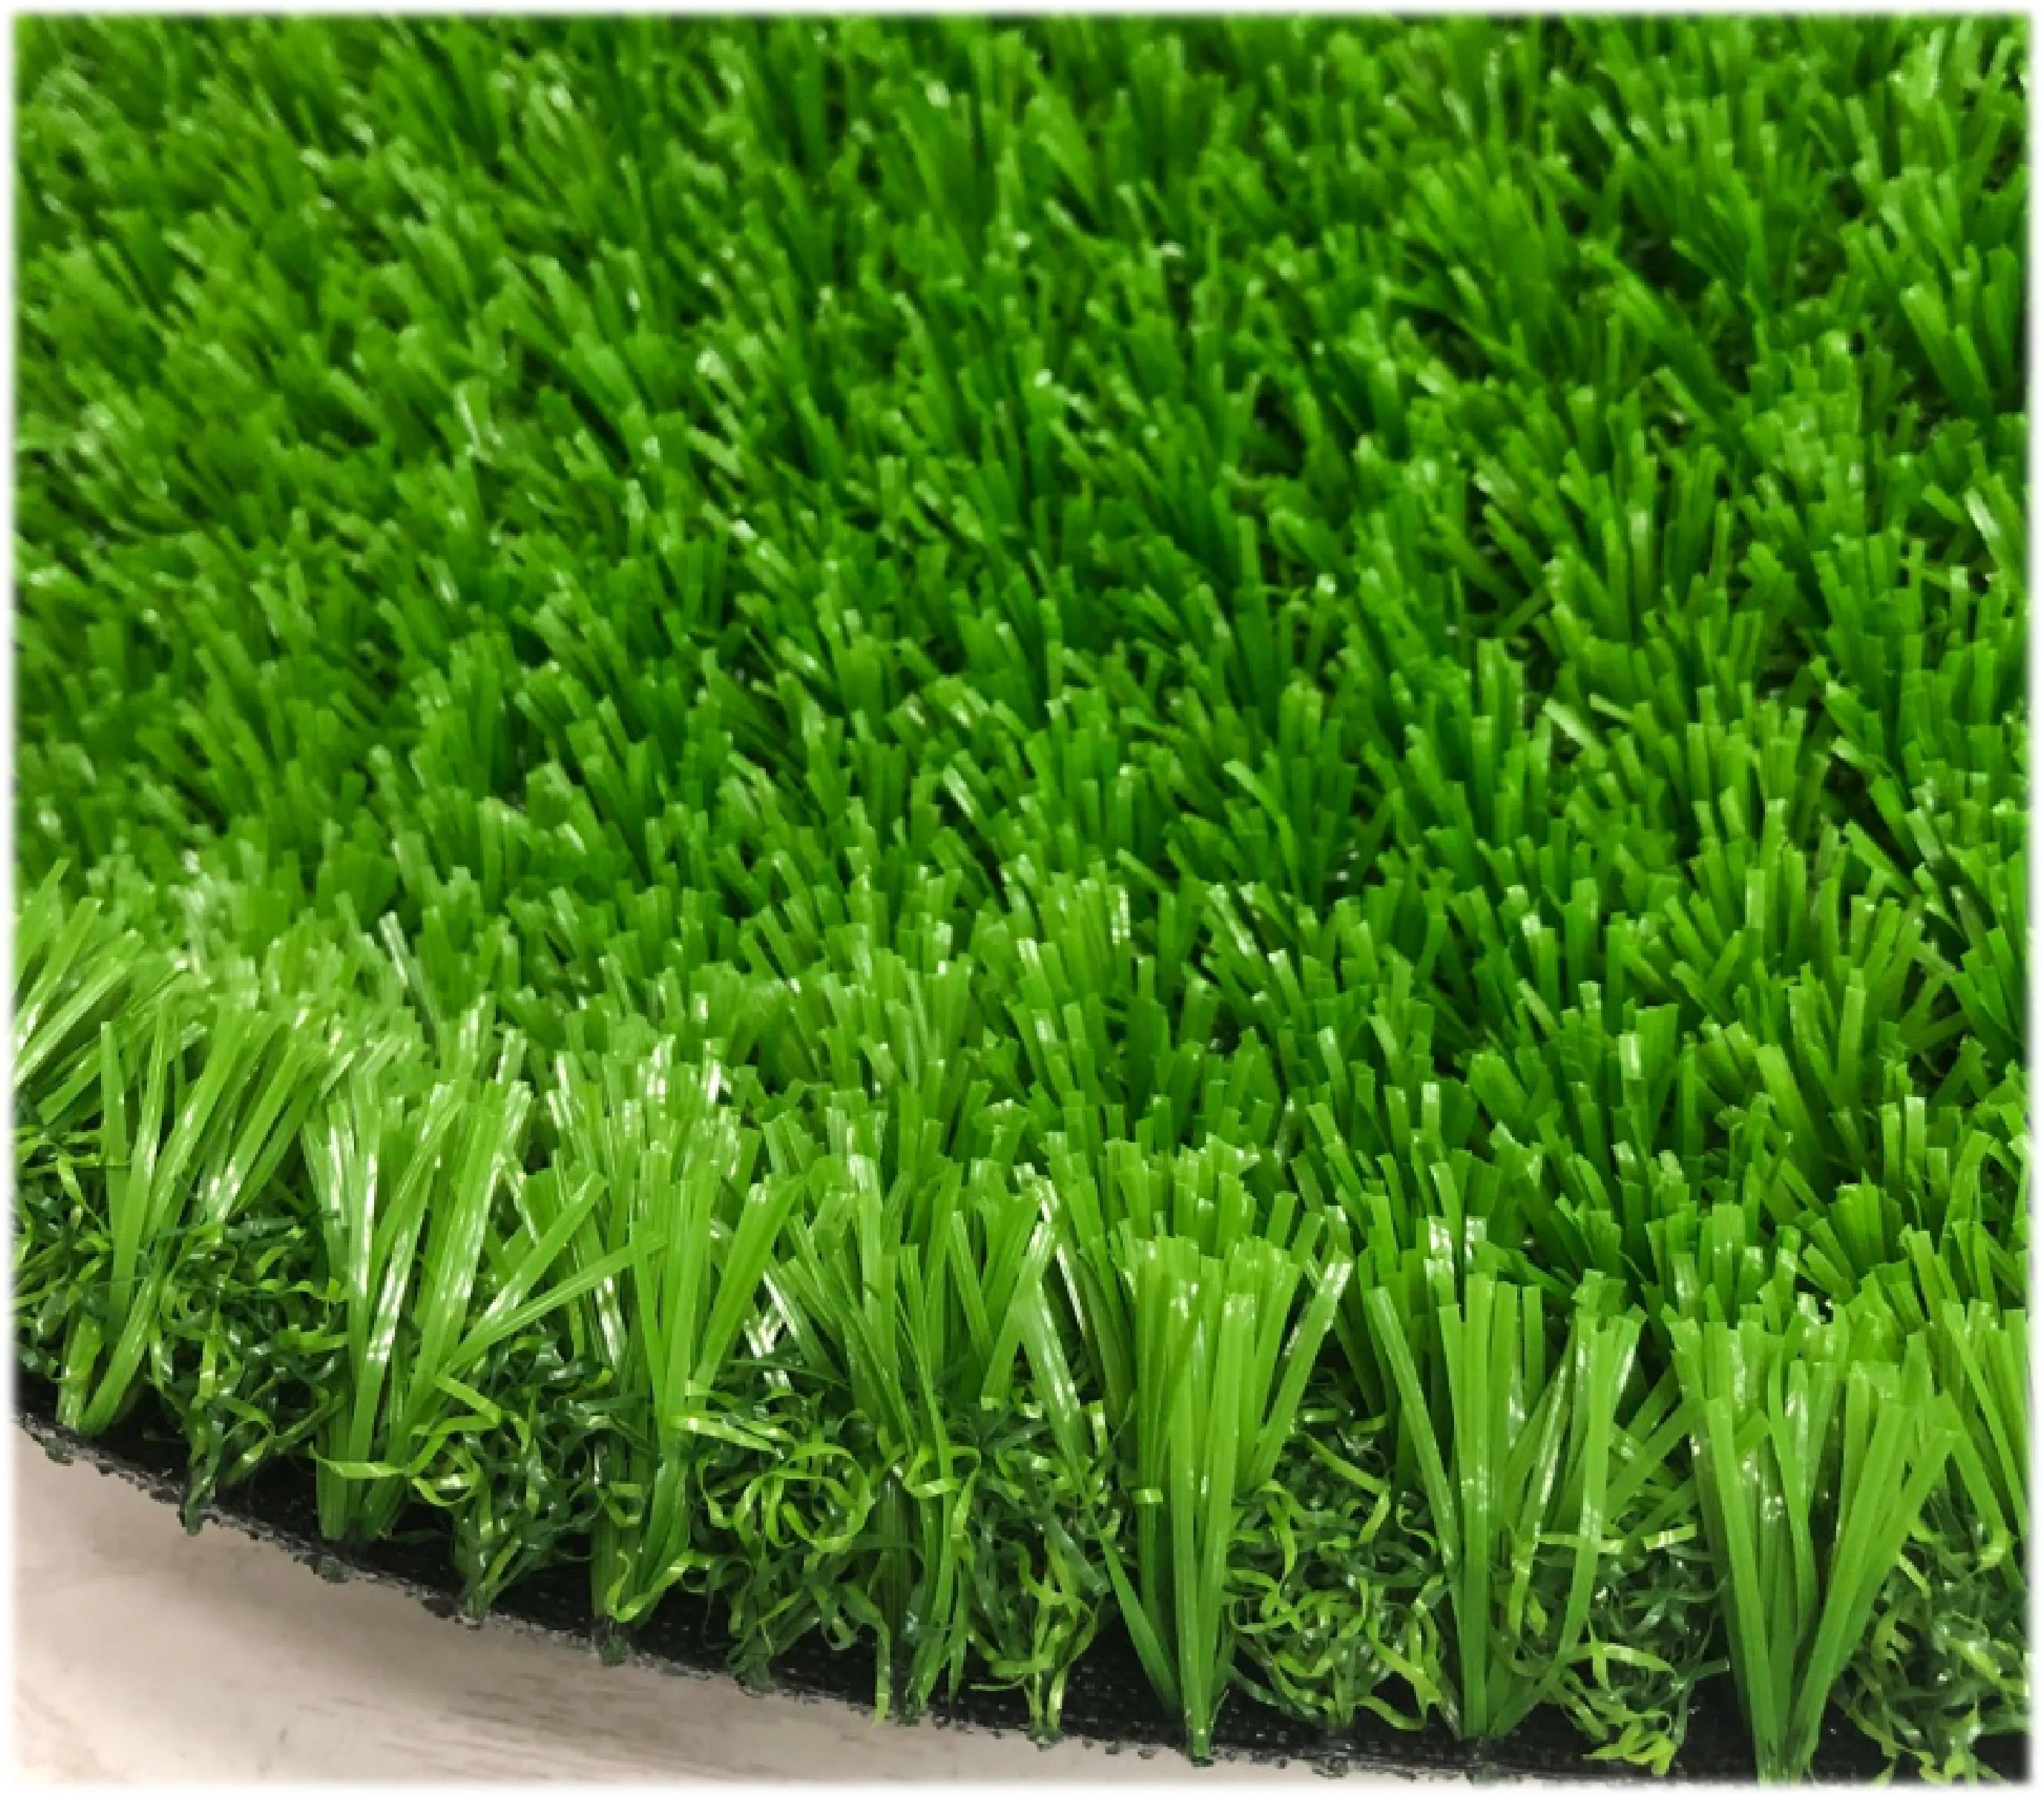 Kinds of Grass Artificial Grass lowest Prices for sport garden